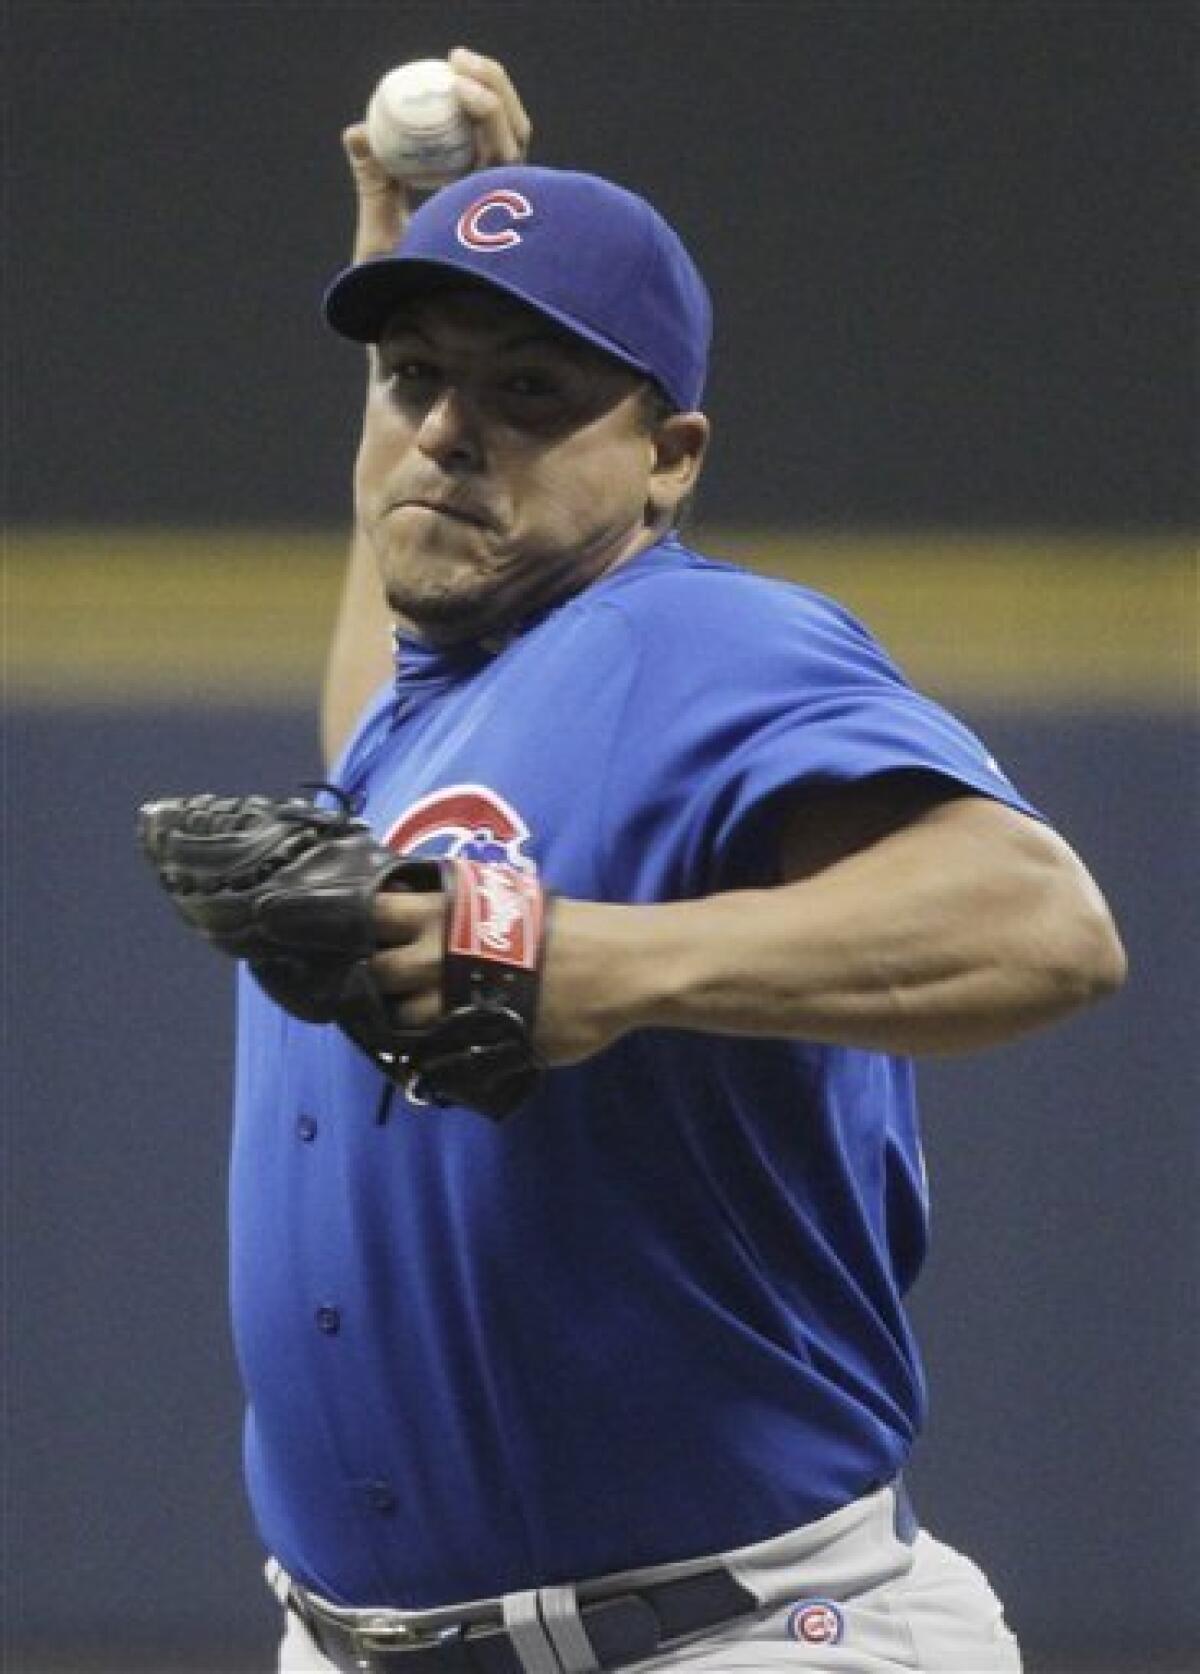 Zambrano dominant again, Cubs beat Brewers 4-0 - The San Diego Union-Tribune